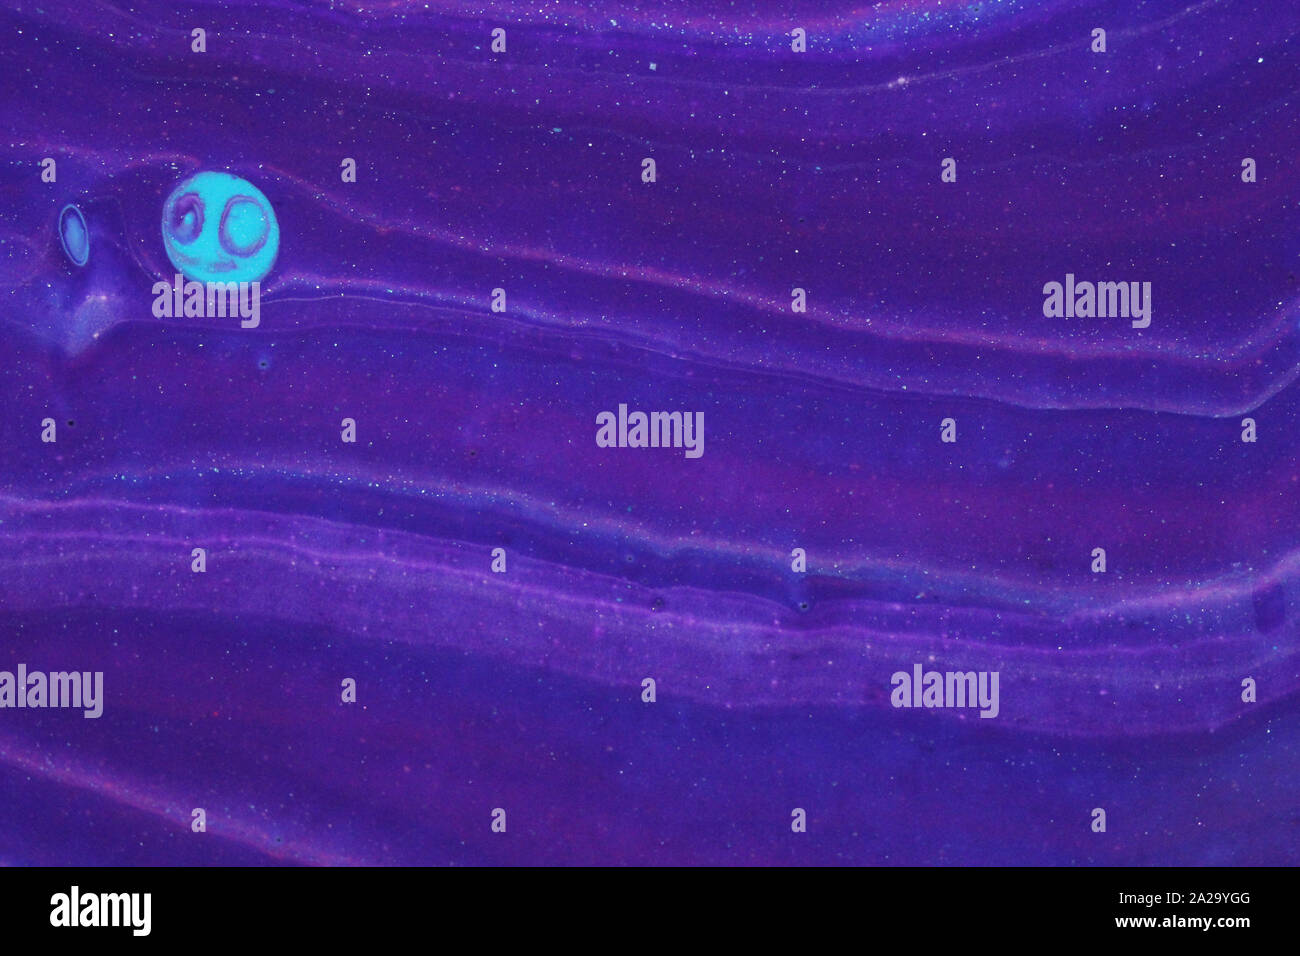 A smiley blue moon is hanging out in a creepy purple Halloween sky with wispy cloud layers for backgrounds. Stock Photo